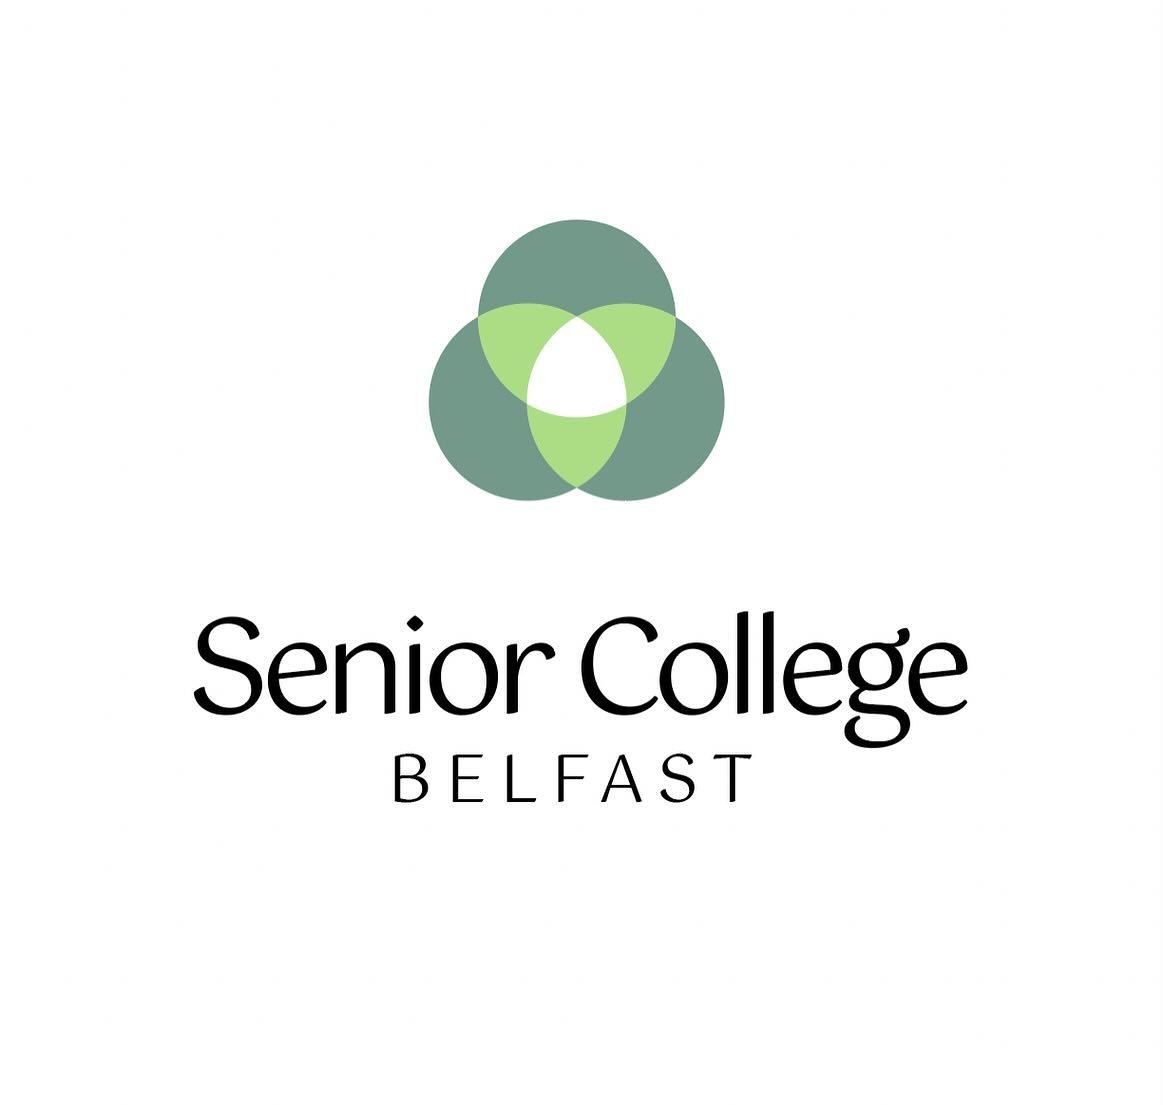 Logo design evolution: a sometimes messy process of moving from creative chaos to order. So happy to get to work with this great local organization! Check them out at belfastseniorcollege.org 

#belfastseniorcollege #seniorcollegebelfast #logodesign 